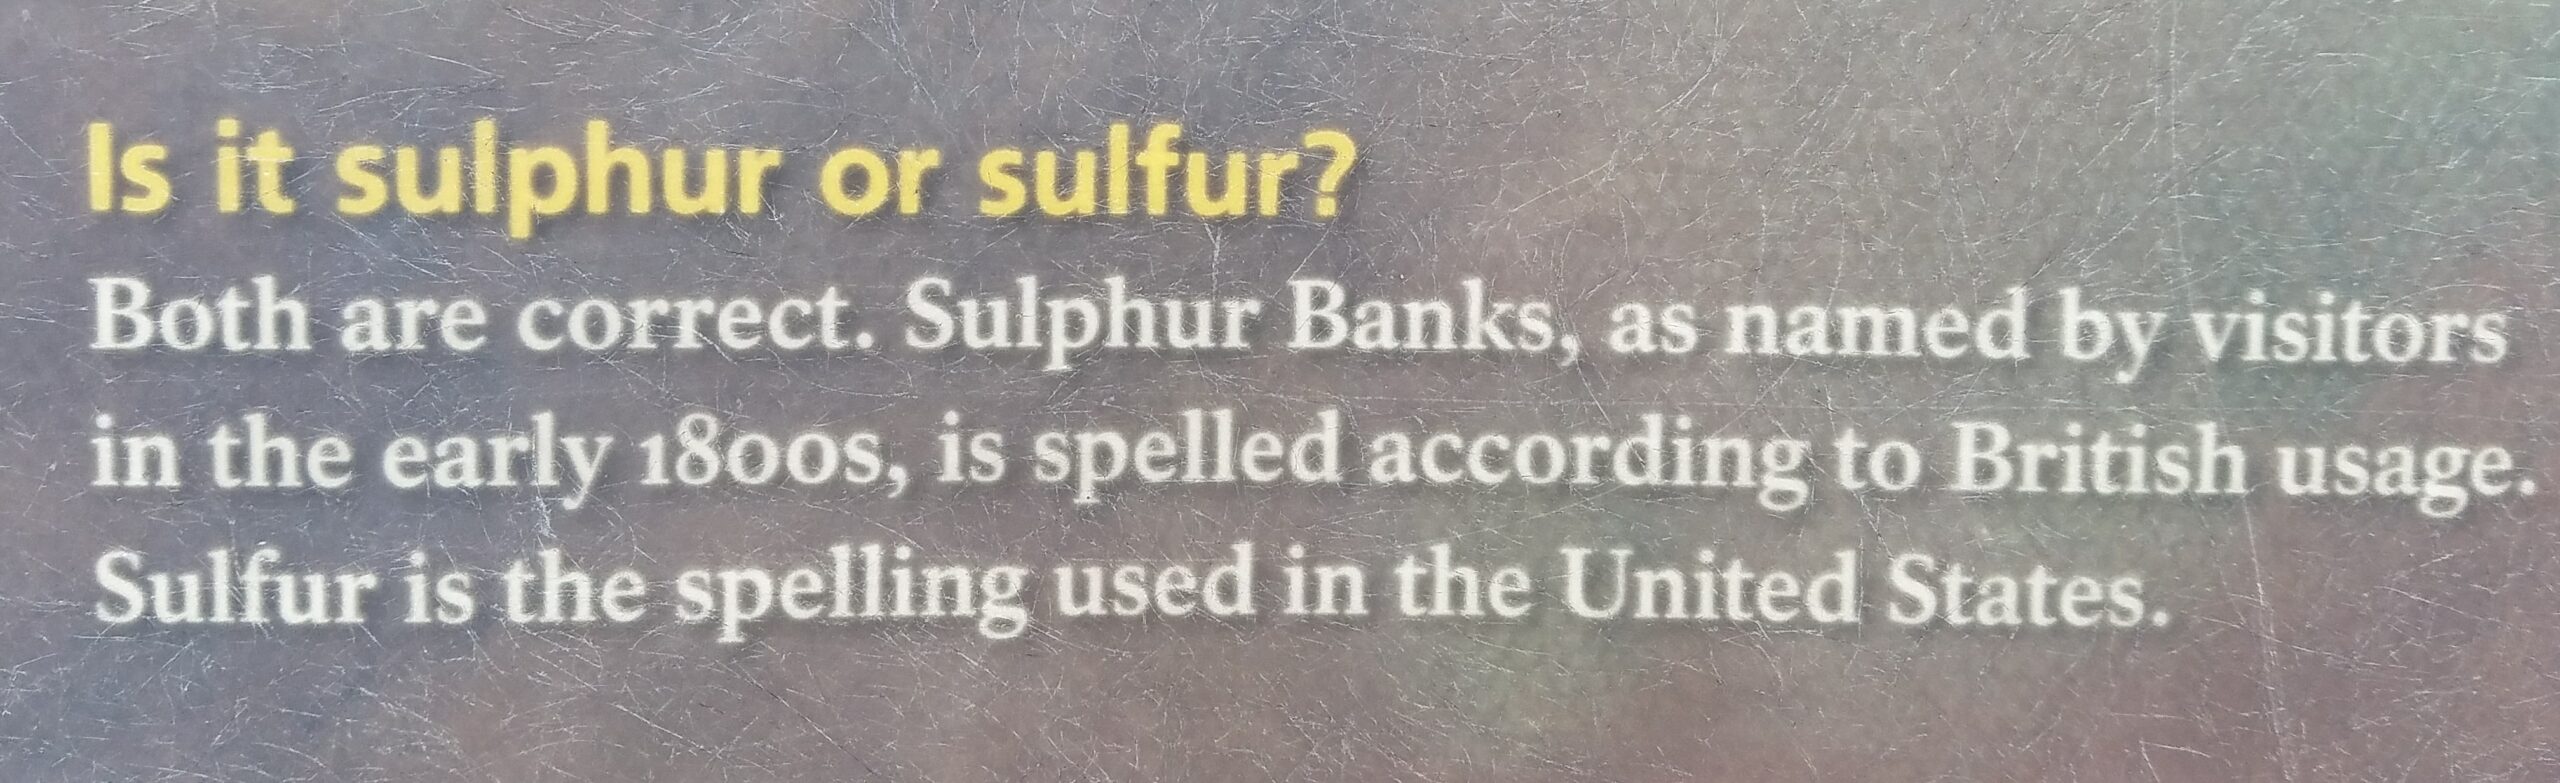 A sign that discuss British vs. US spellings: "Is it sulfur or sulphur? Both are correct. Sulphur Banks, as named by visitors in the early 1800's, is spelled according to British usage. Sulfur is the spelling used in the United States.